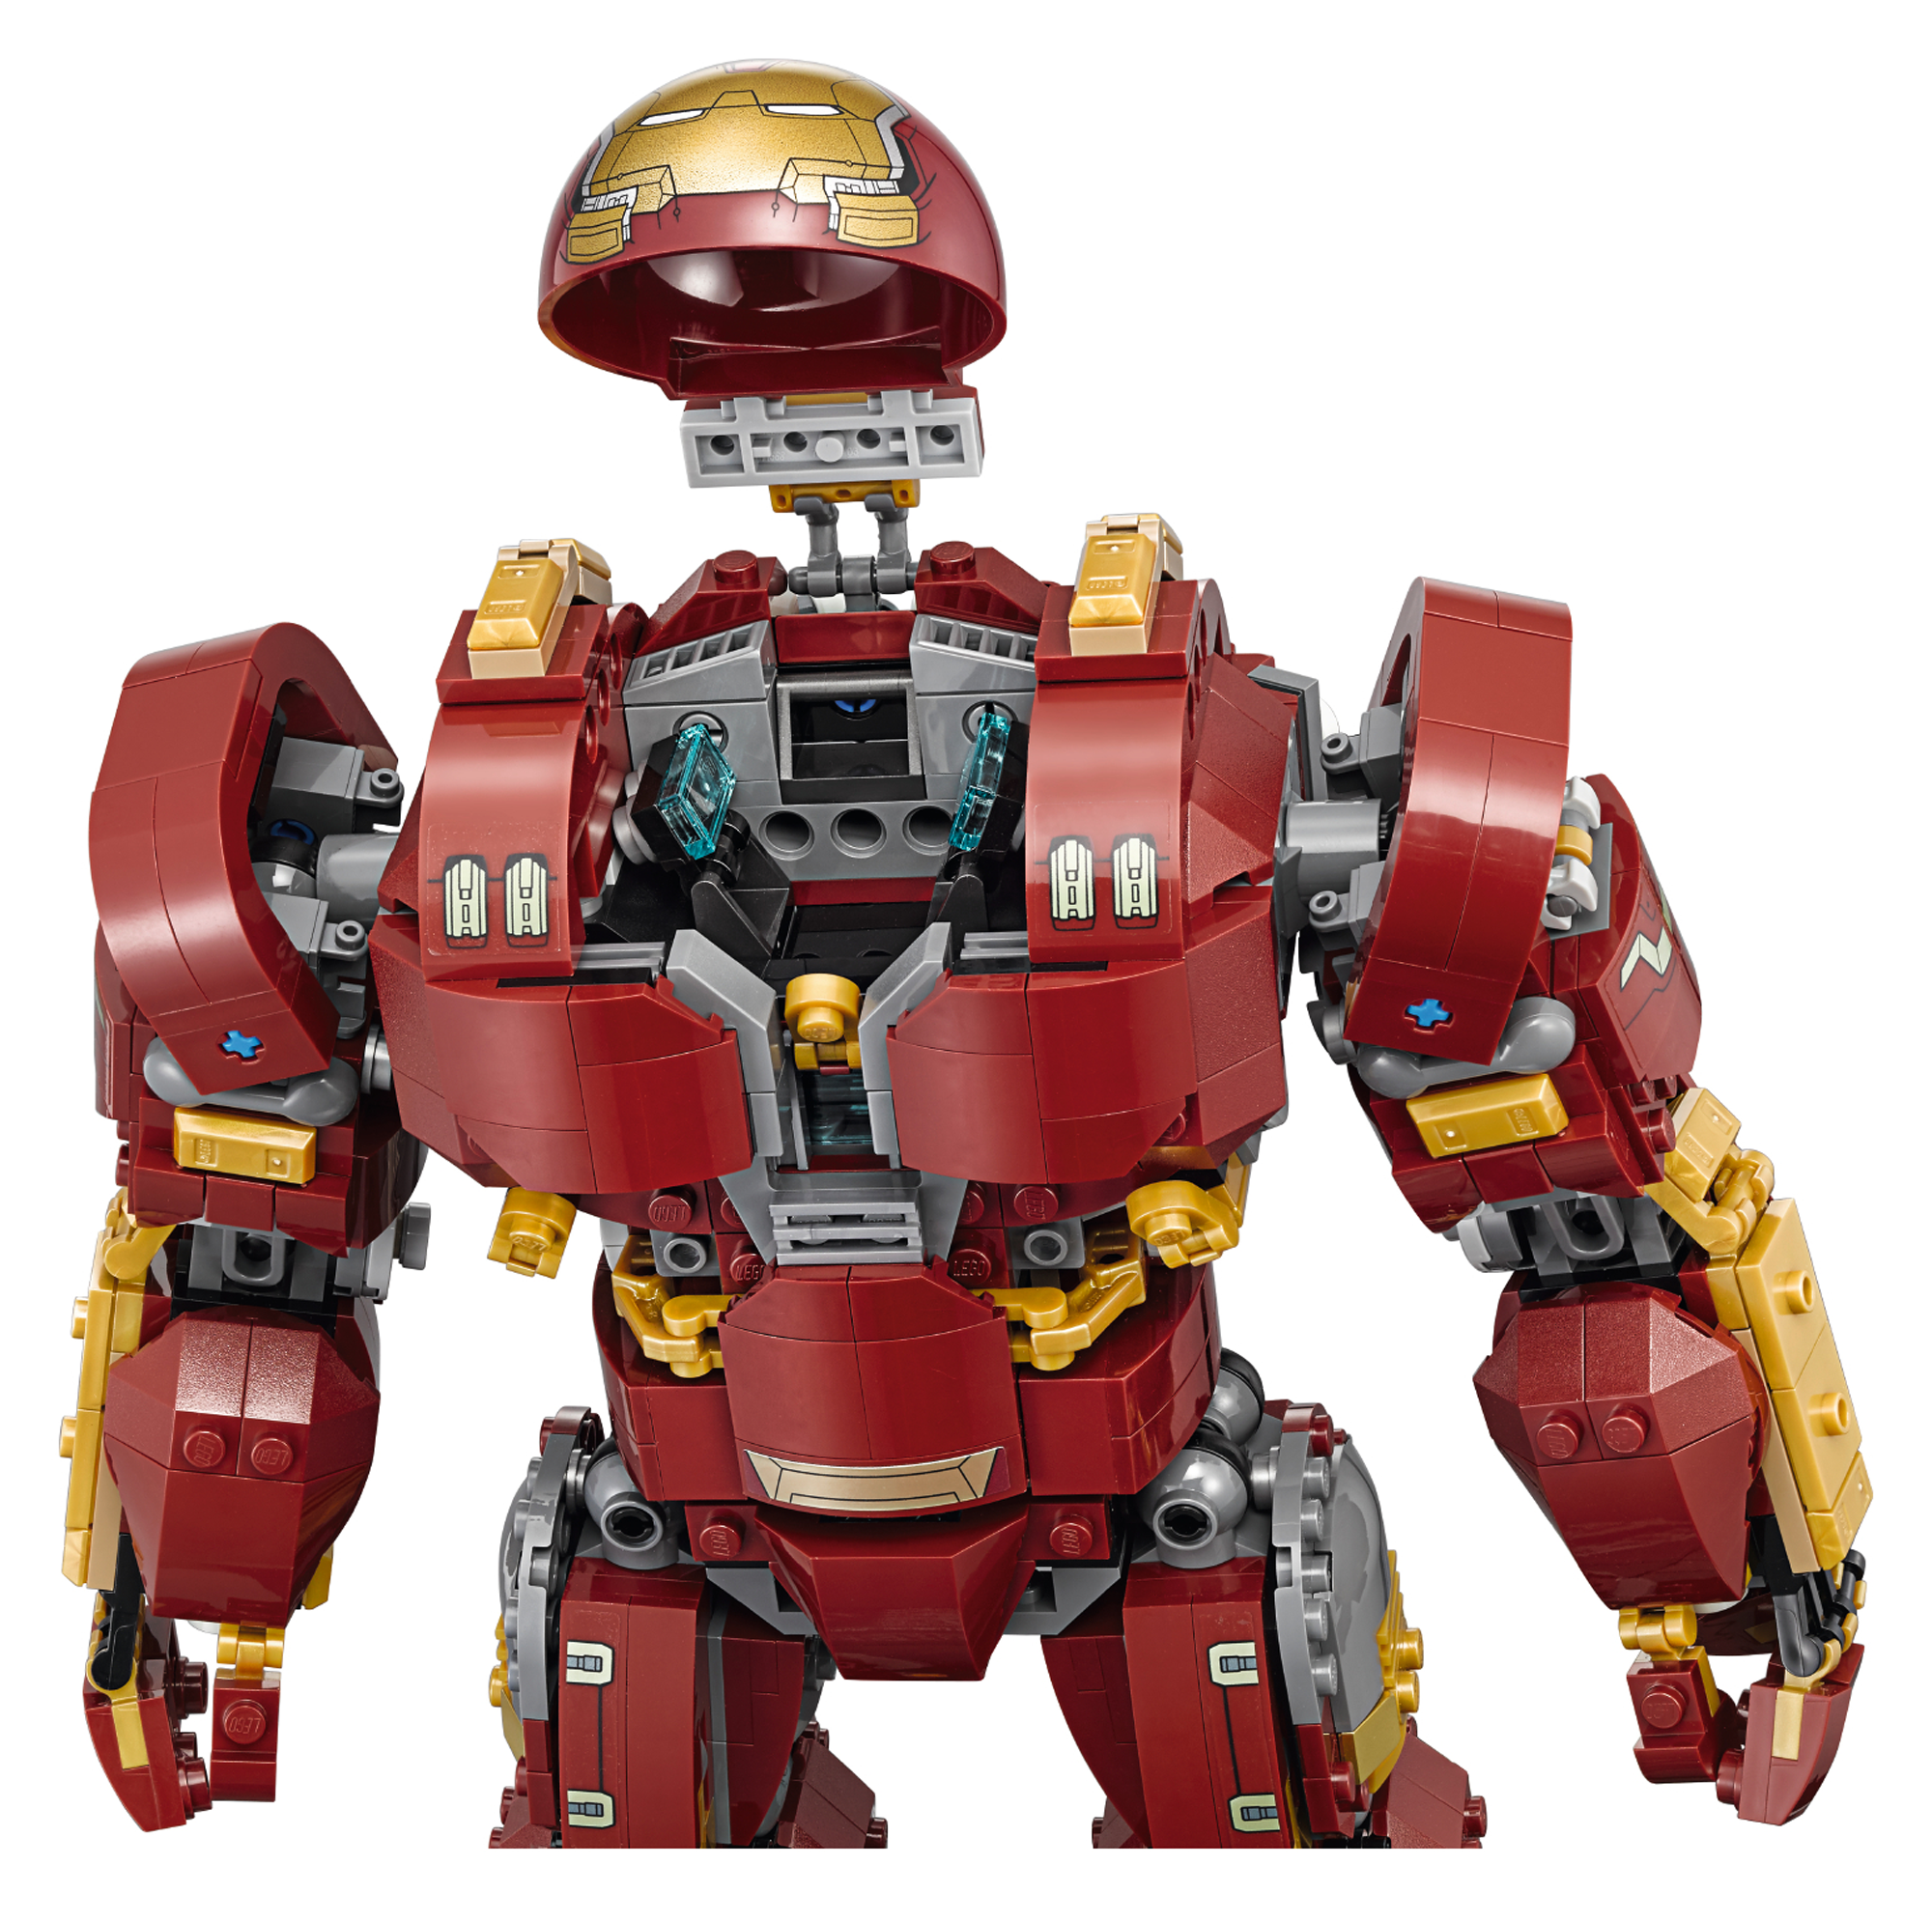 check-out-this-incredibly-cool-iron-man-hulkbuster-lego-playset10.png